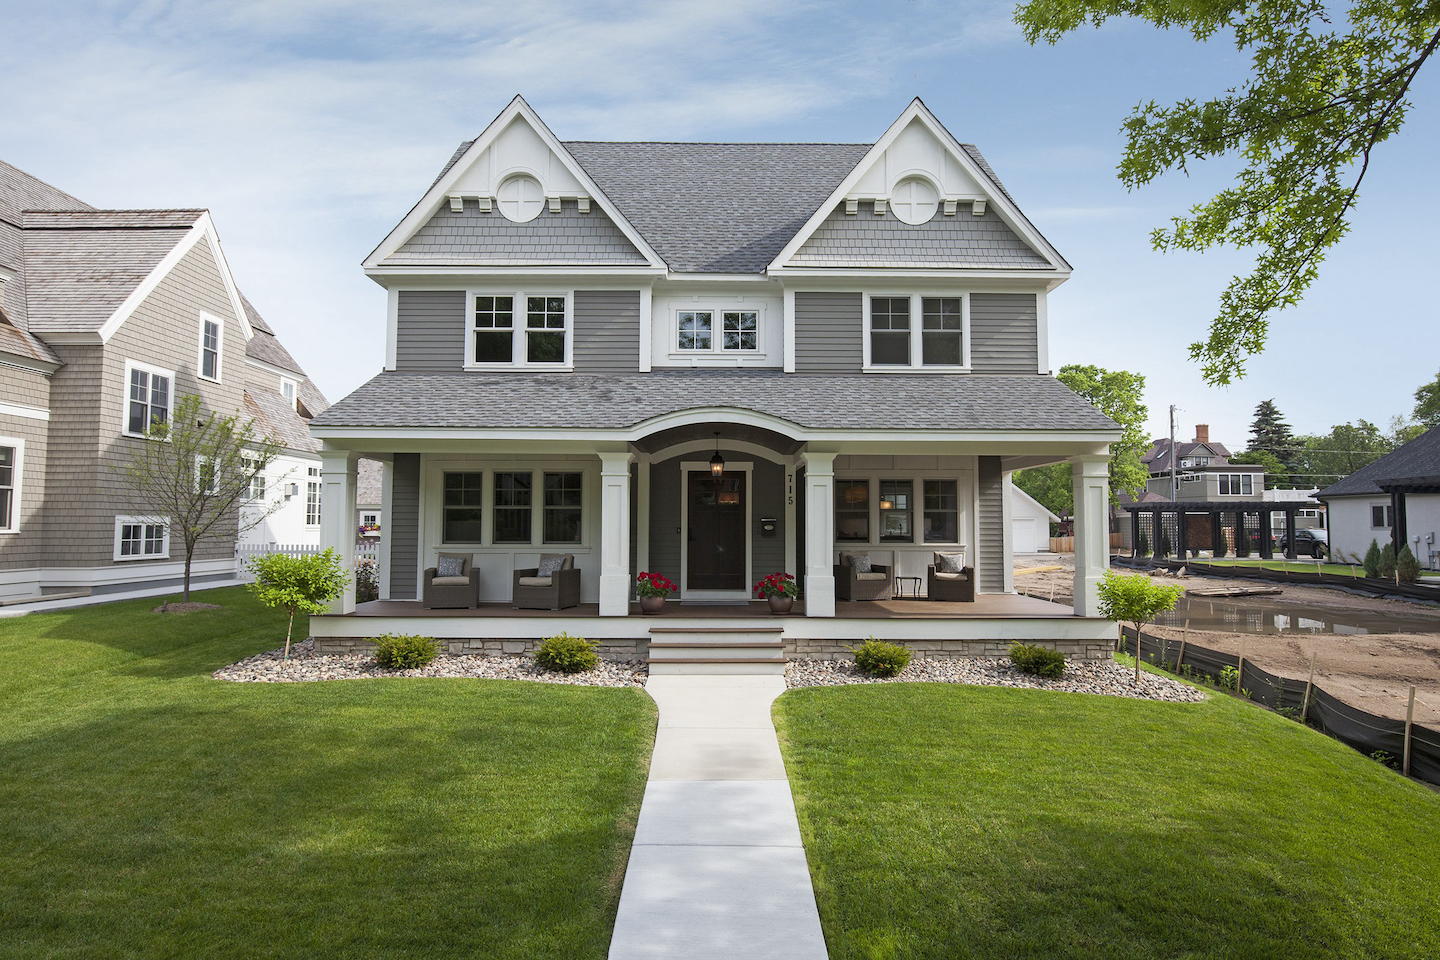 Refresh your exterior with a gray house and a white front porch